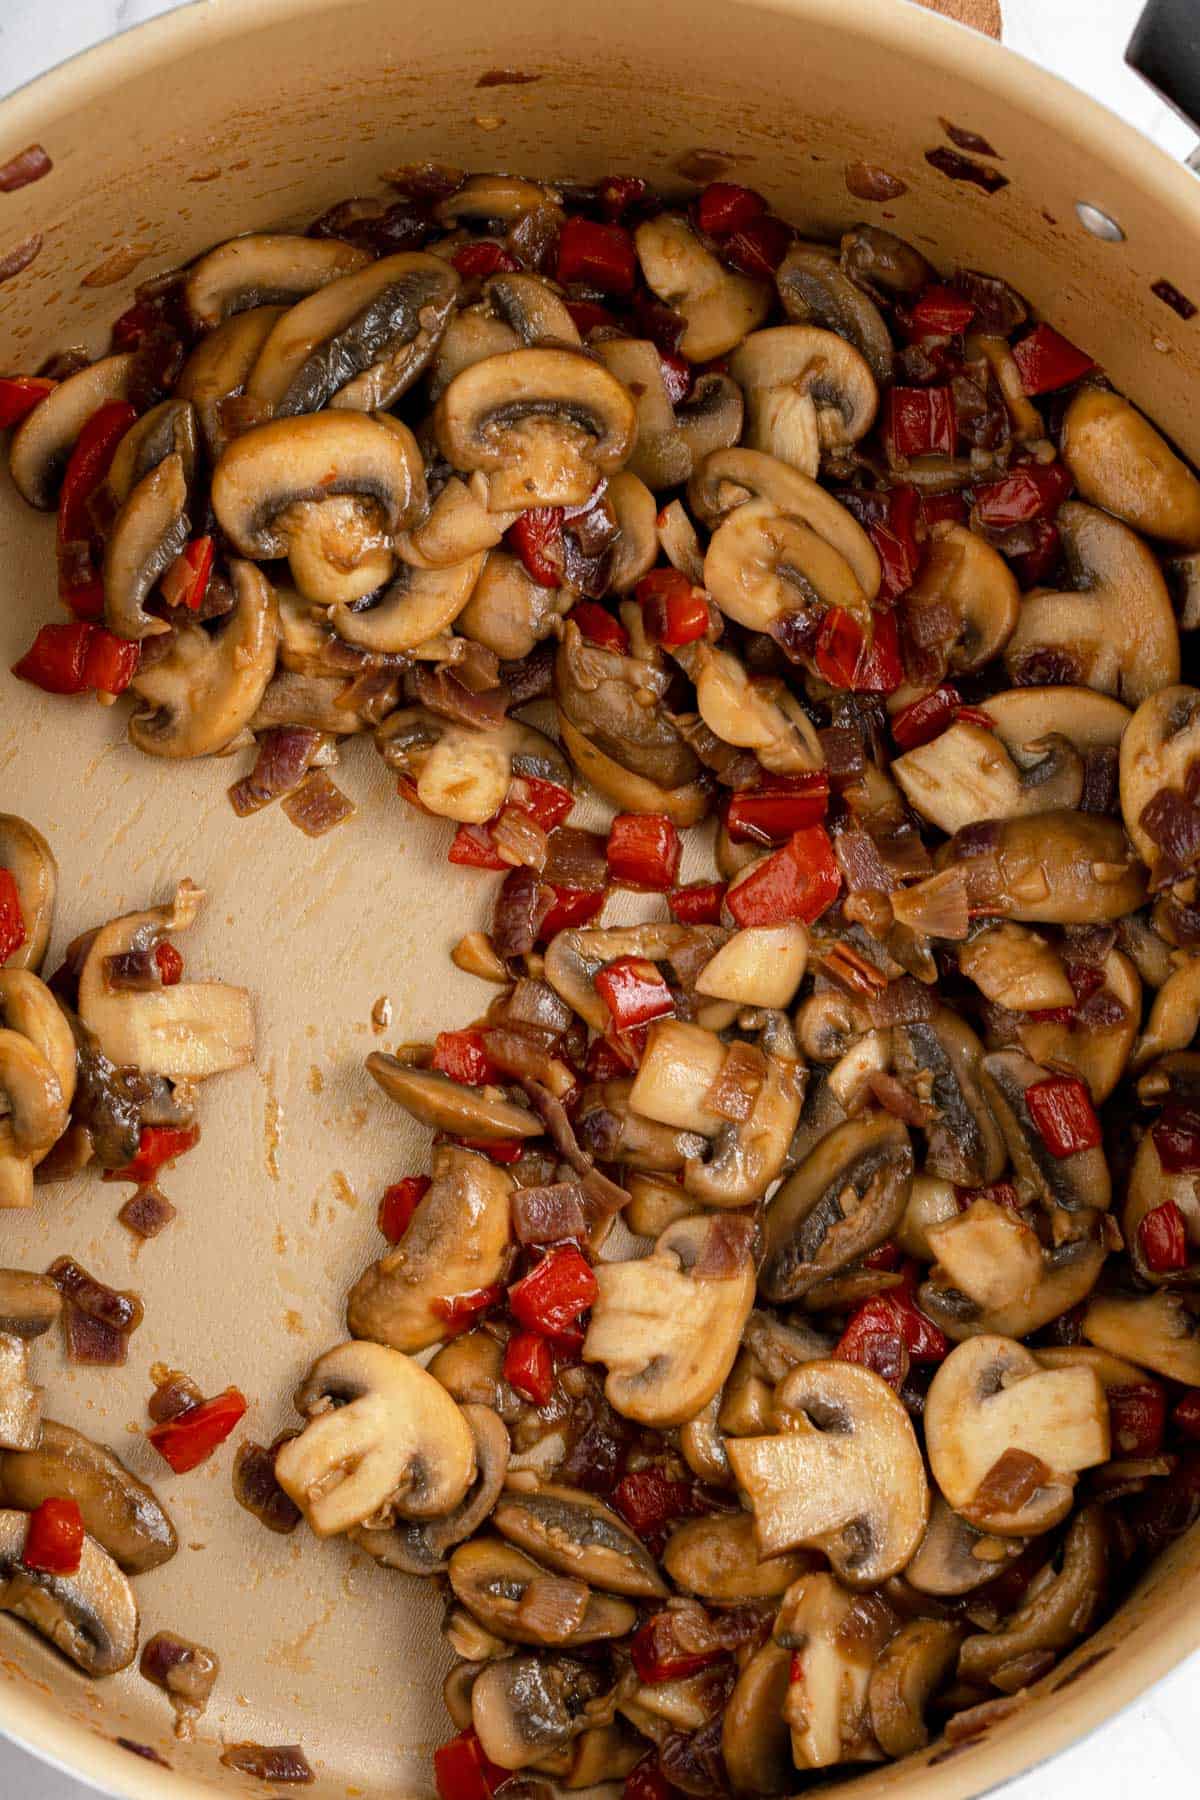 Sauteed mushrooms, red pepper and onion for quesadilla filling.